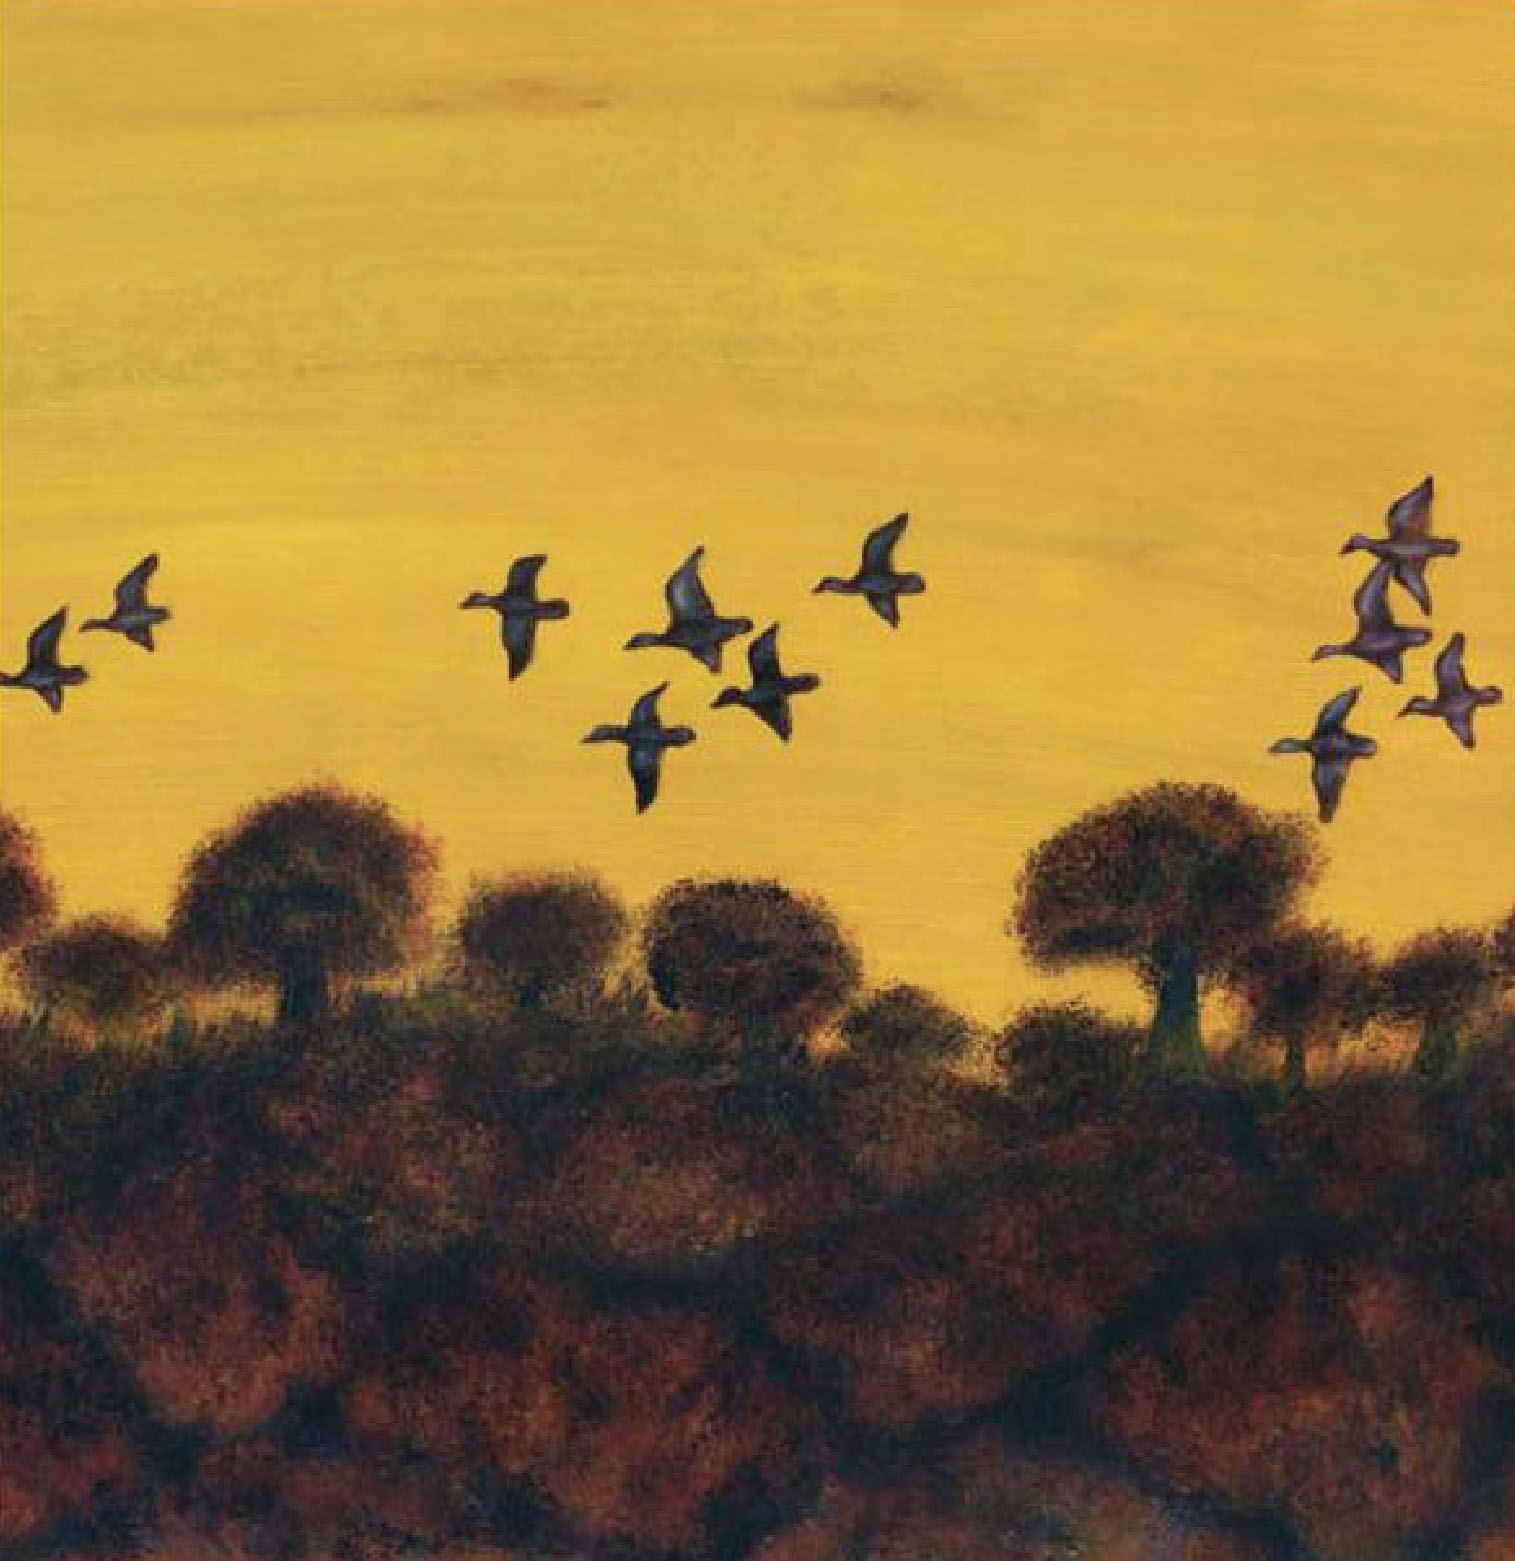 Migrating Birds from Tale of Chipilo